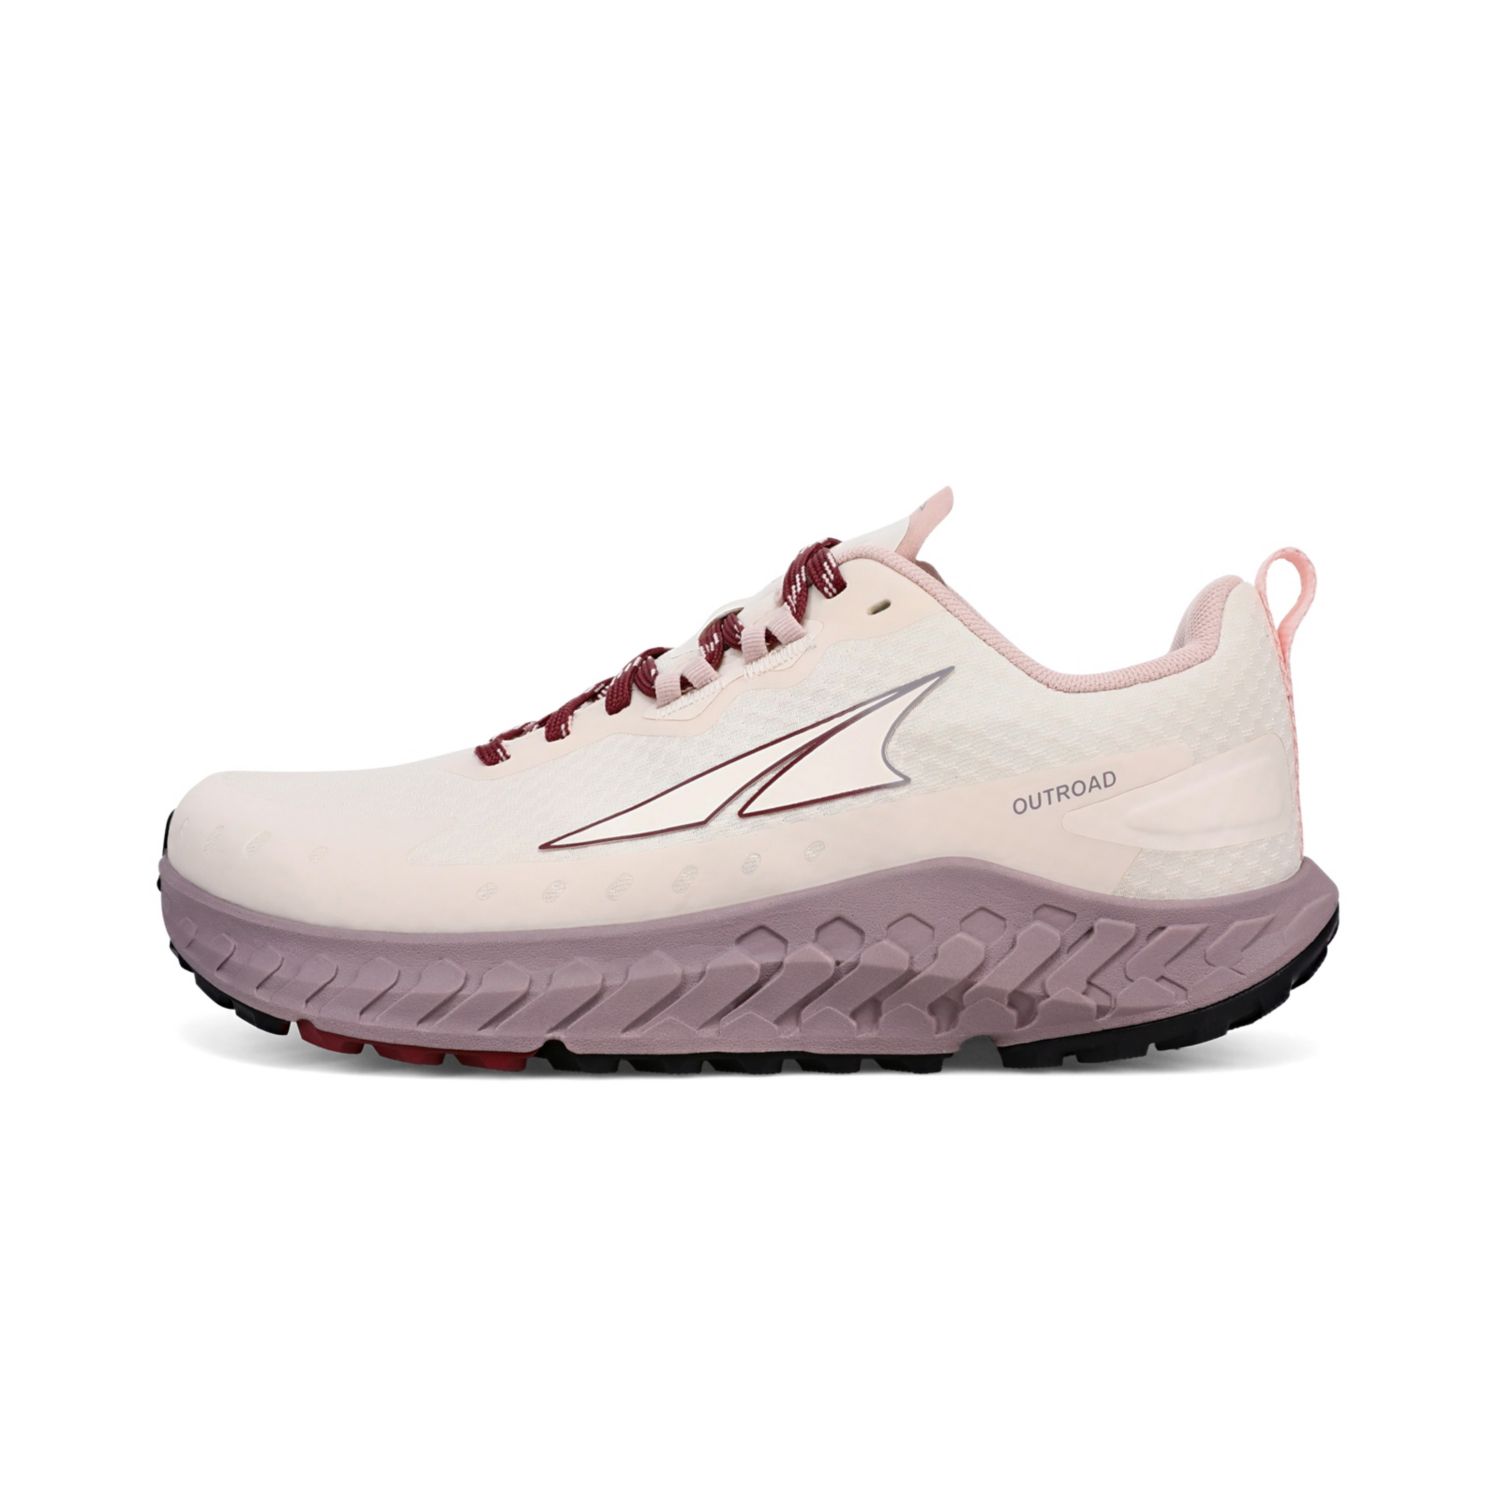 Altra Outroad Women's Trail Running Shoes White | South Africa-64750139